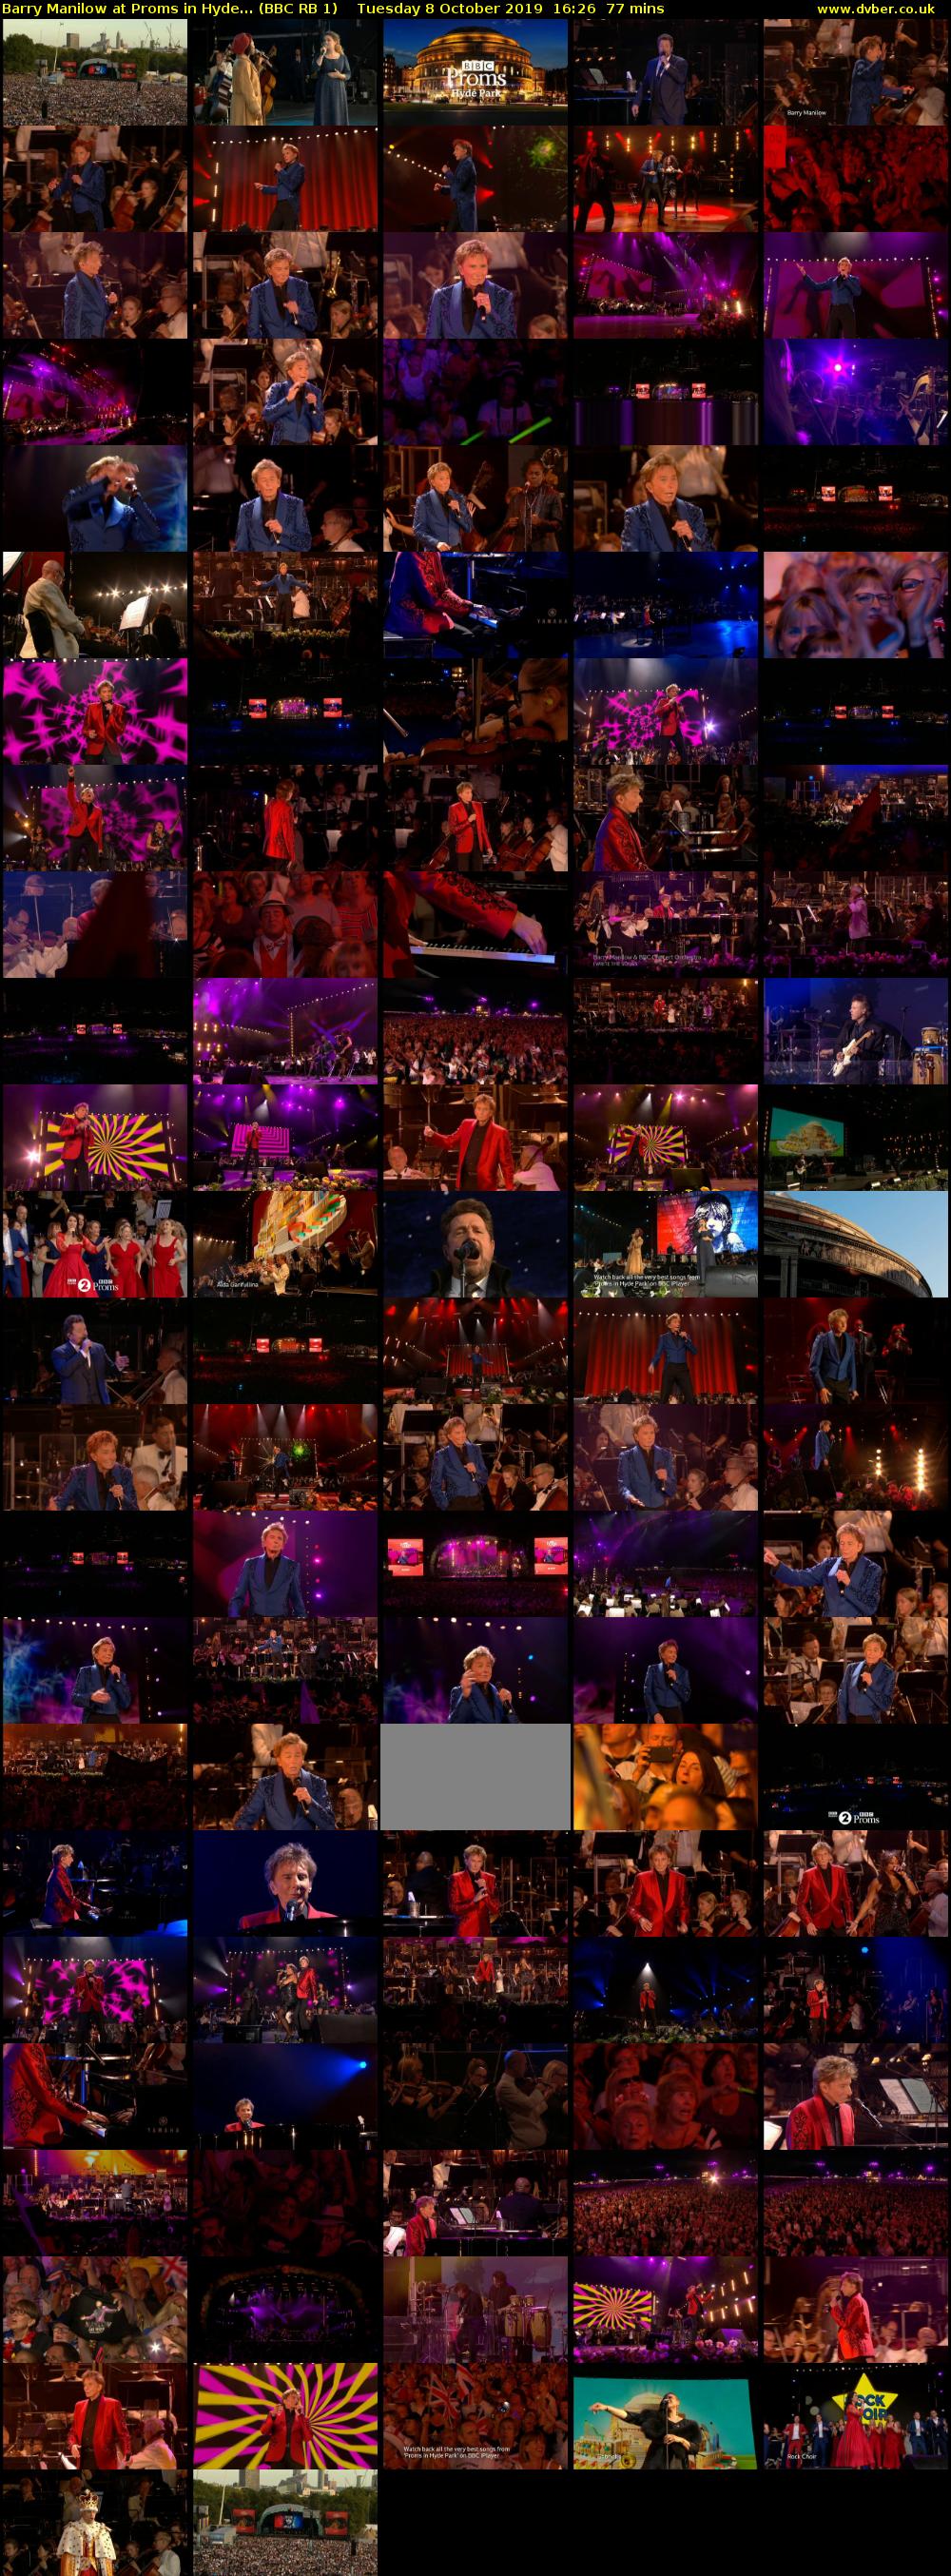 Barry Manilow at Proms in Hyde... (BBC RB 1) Tuesday 8 October 2019 16:26 - 17:43